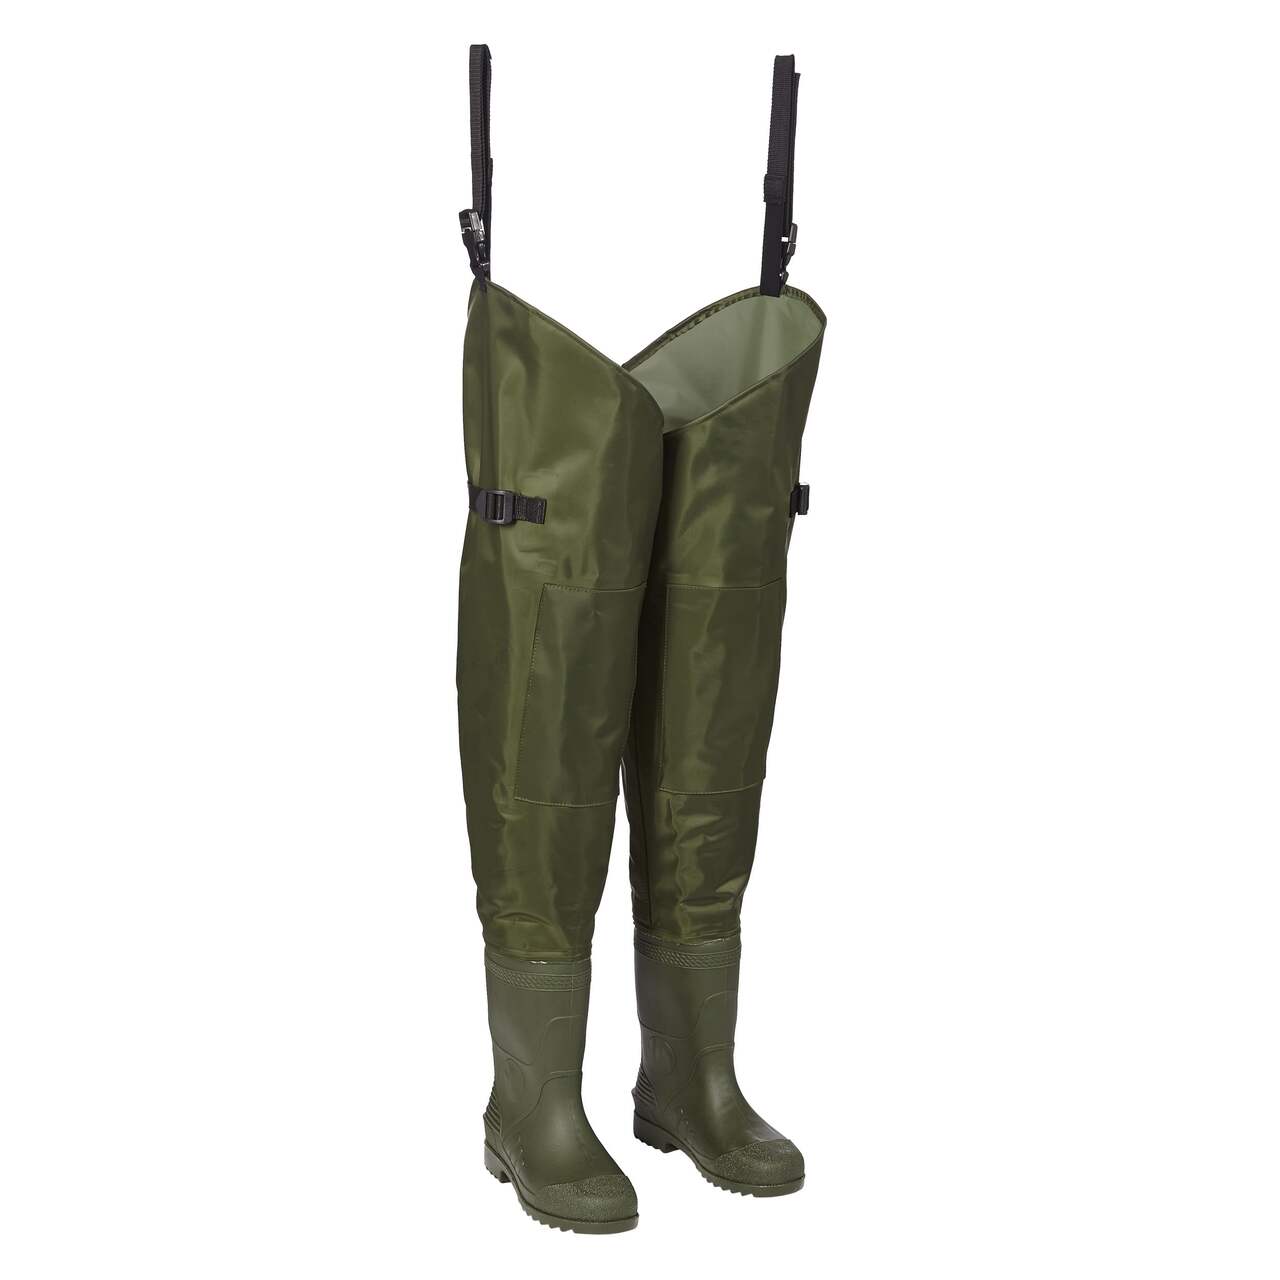 Outbound Adult PVC Bootfoot Hip Waders, Green